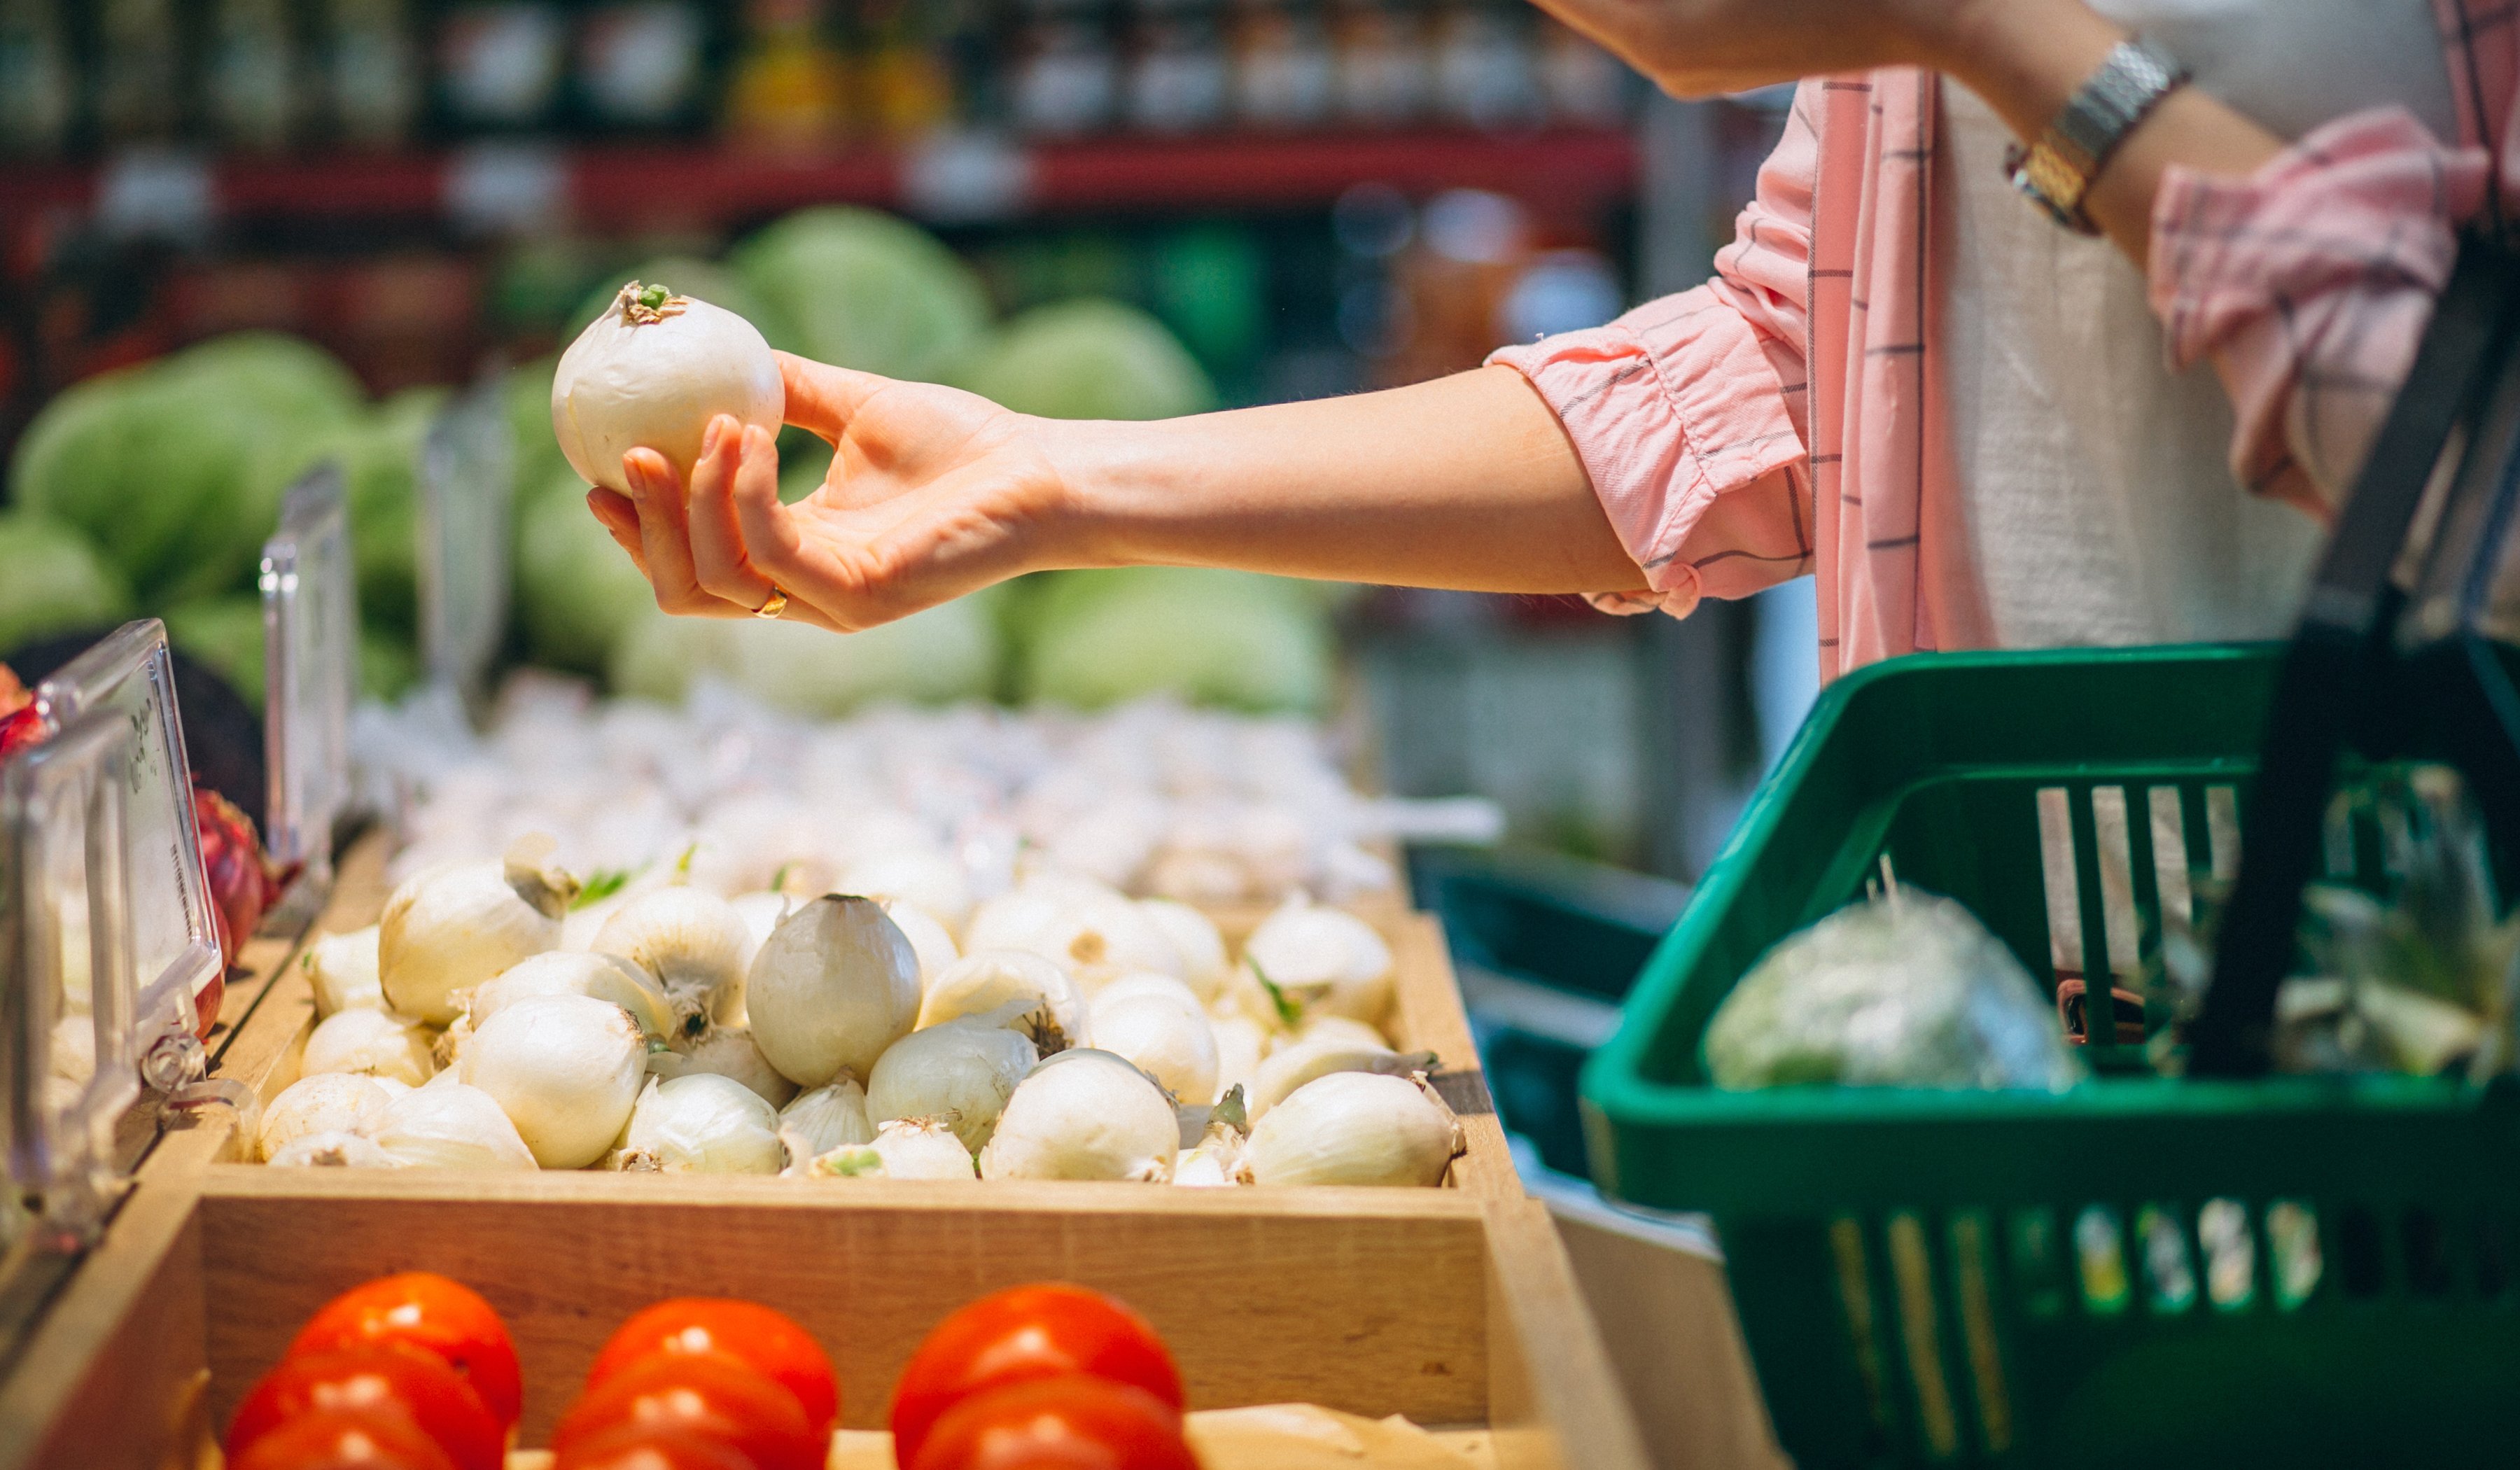 5 Simple Ways to Quickly Sell Slow-Moving Grocery Items